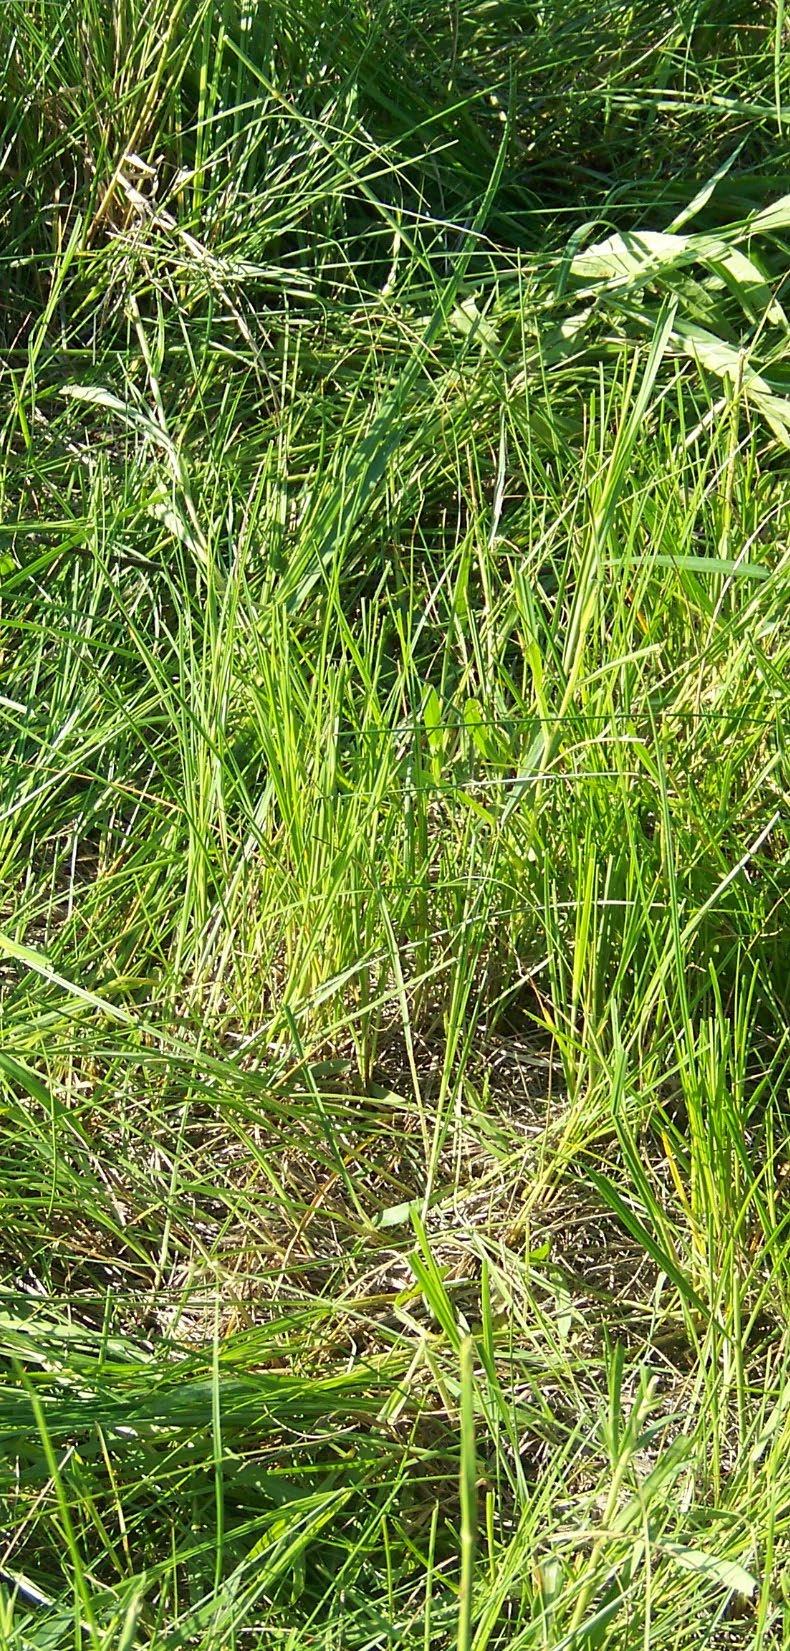 Plant Response to Grazing and: Plant Physiology: Differences in physiology allow some plants to tolerate grazing. 1. Plants that regrow quickly replace leaf tissue and photosynthesize sooner. 2.